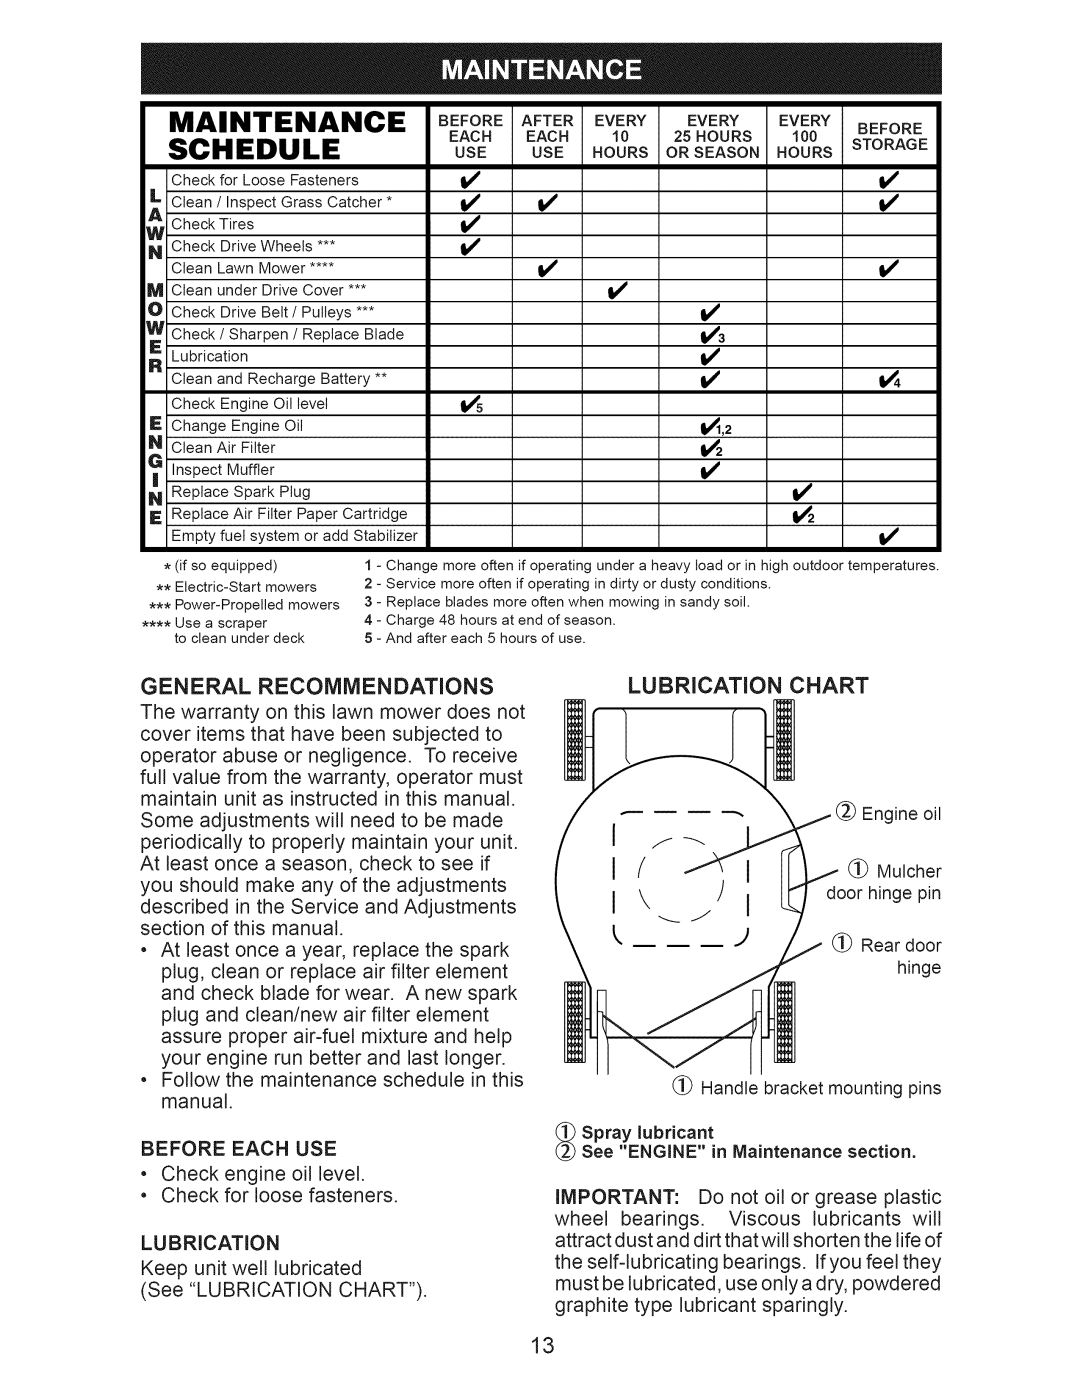 Craftsman 917.371032 owner manual Maintenance, Schedule, Use Hours 